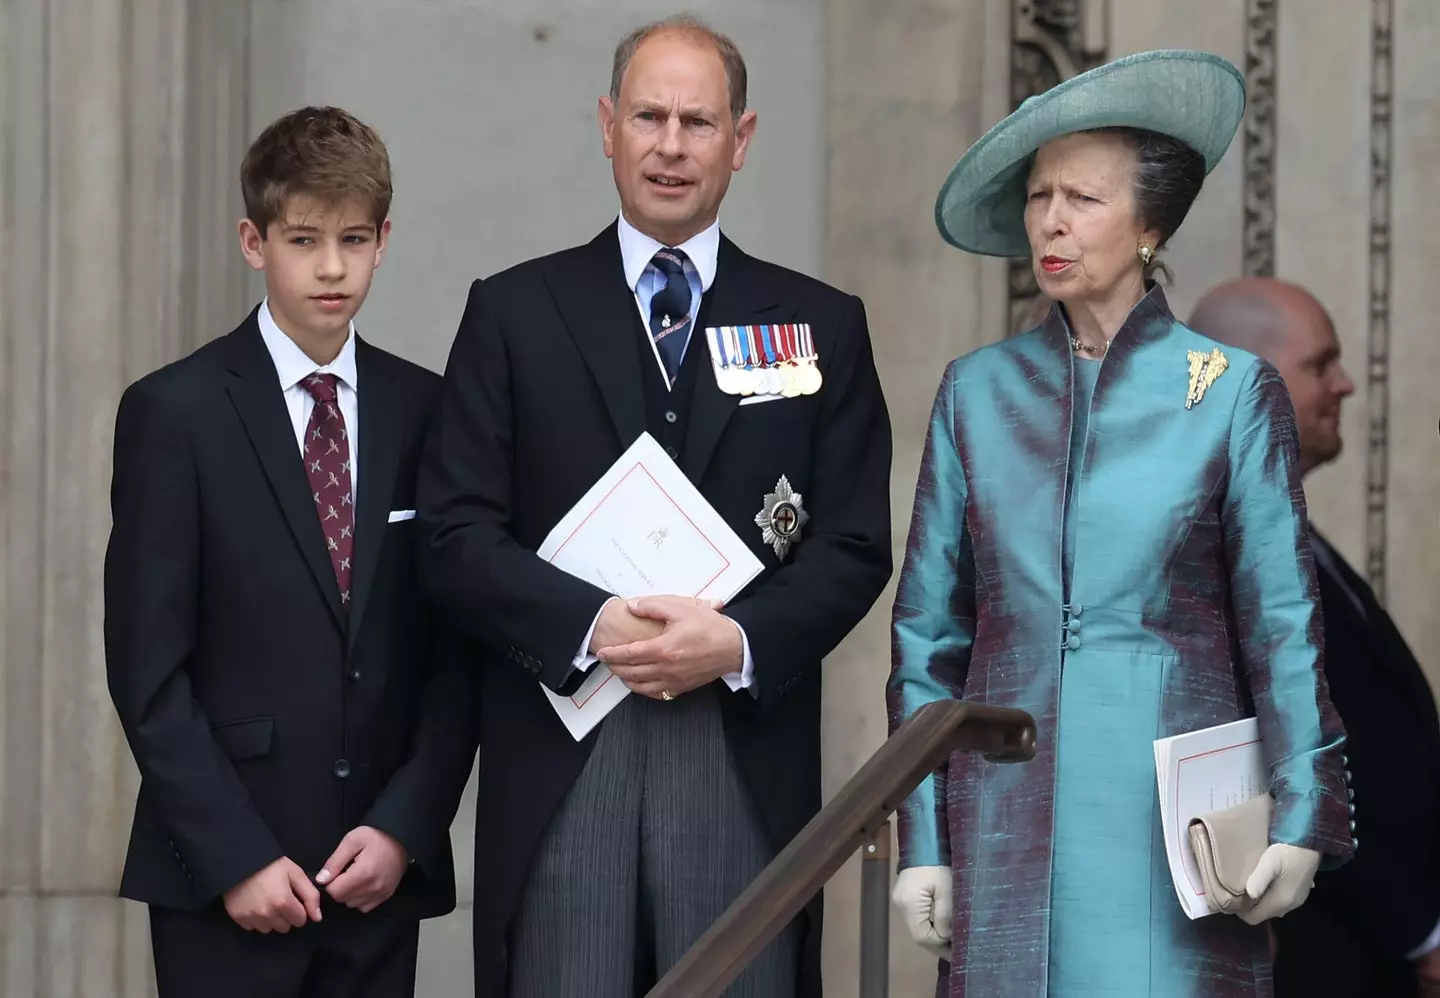 James, Viscount Severn with his dad, Prince Edward, and his auntie, Princess Anne earlier this year.